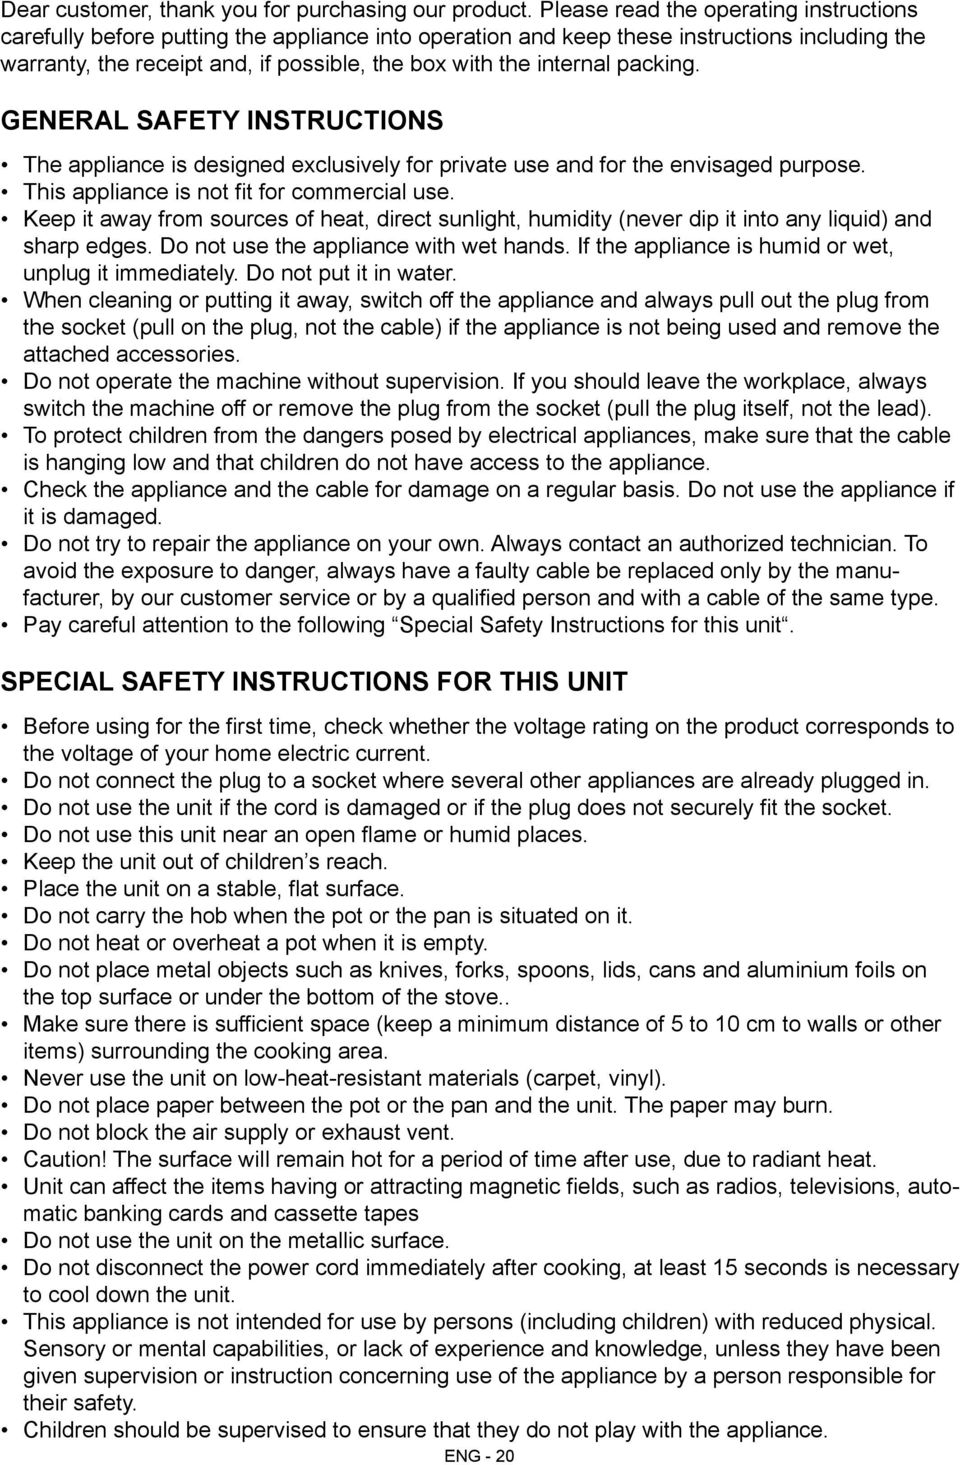 internal packing. General Safety Instructions The appliance is designed exclusively for private use and for the envisaged purpose. This appliance is not fit for commercial use.